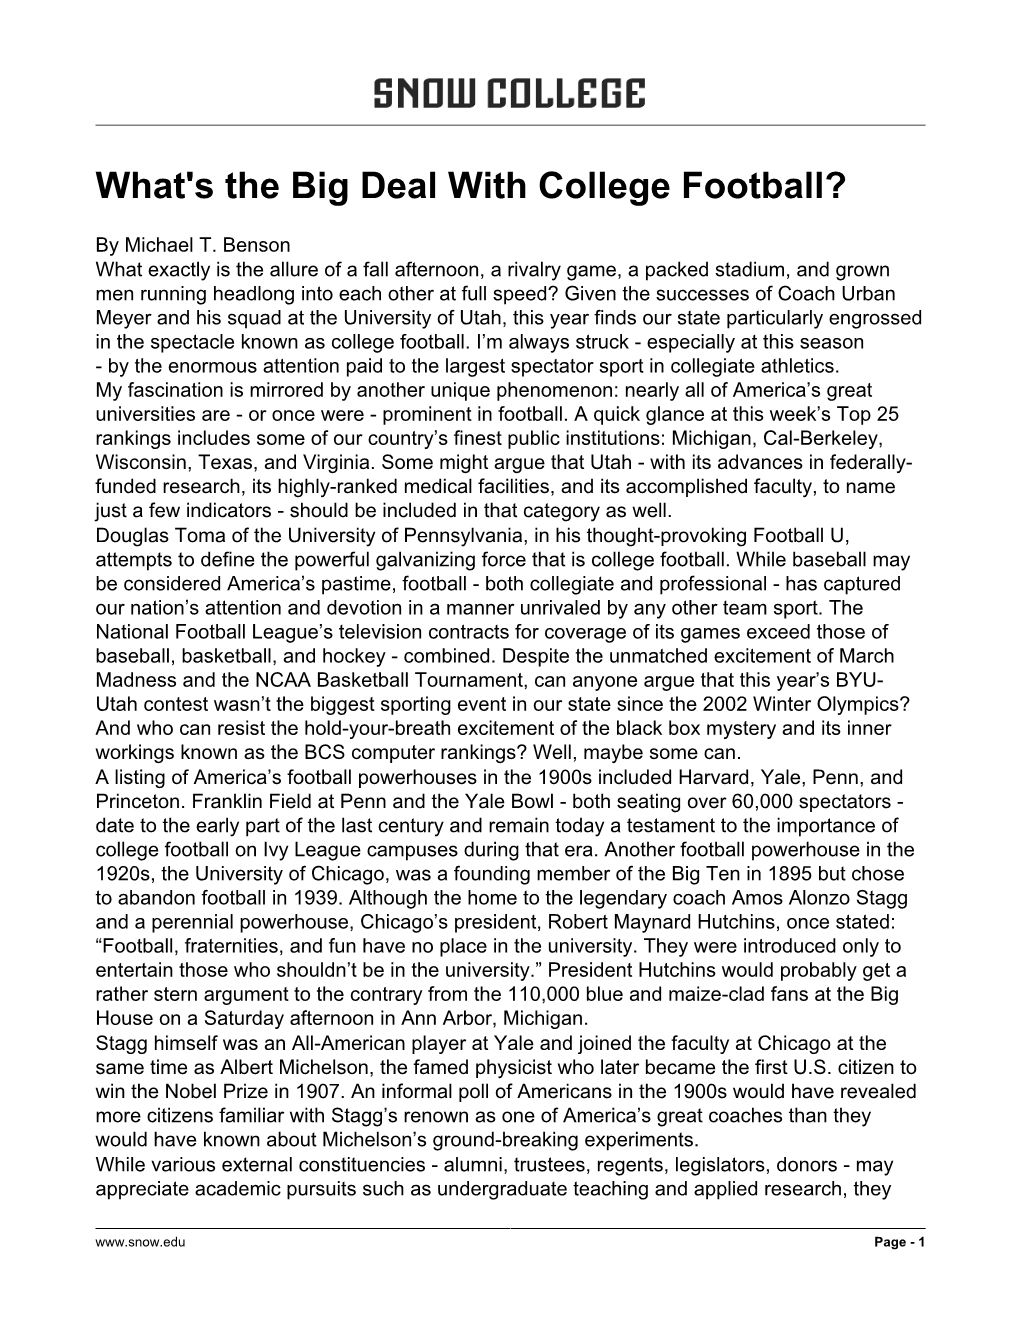 What's the Big Deal with College Football?